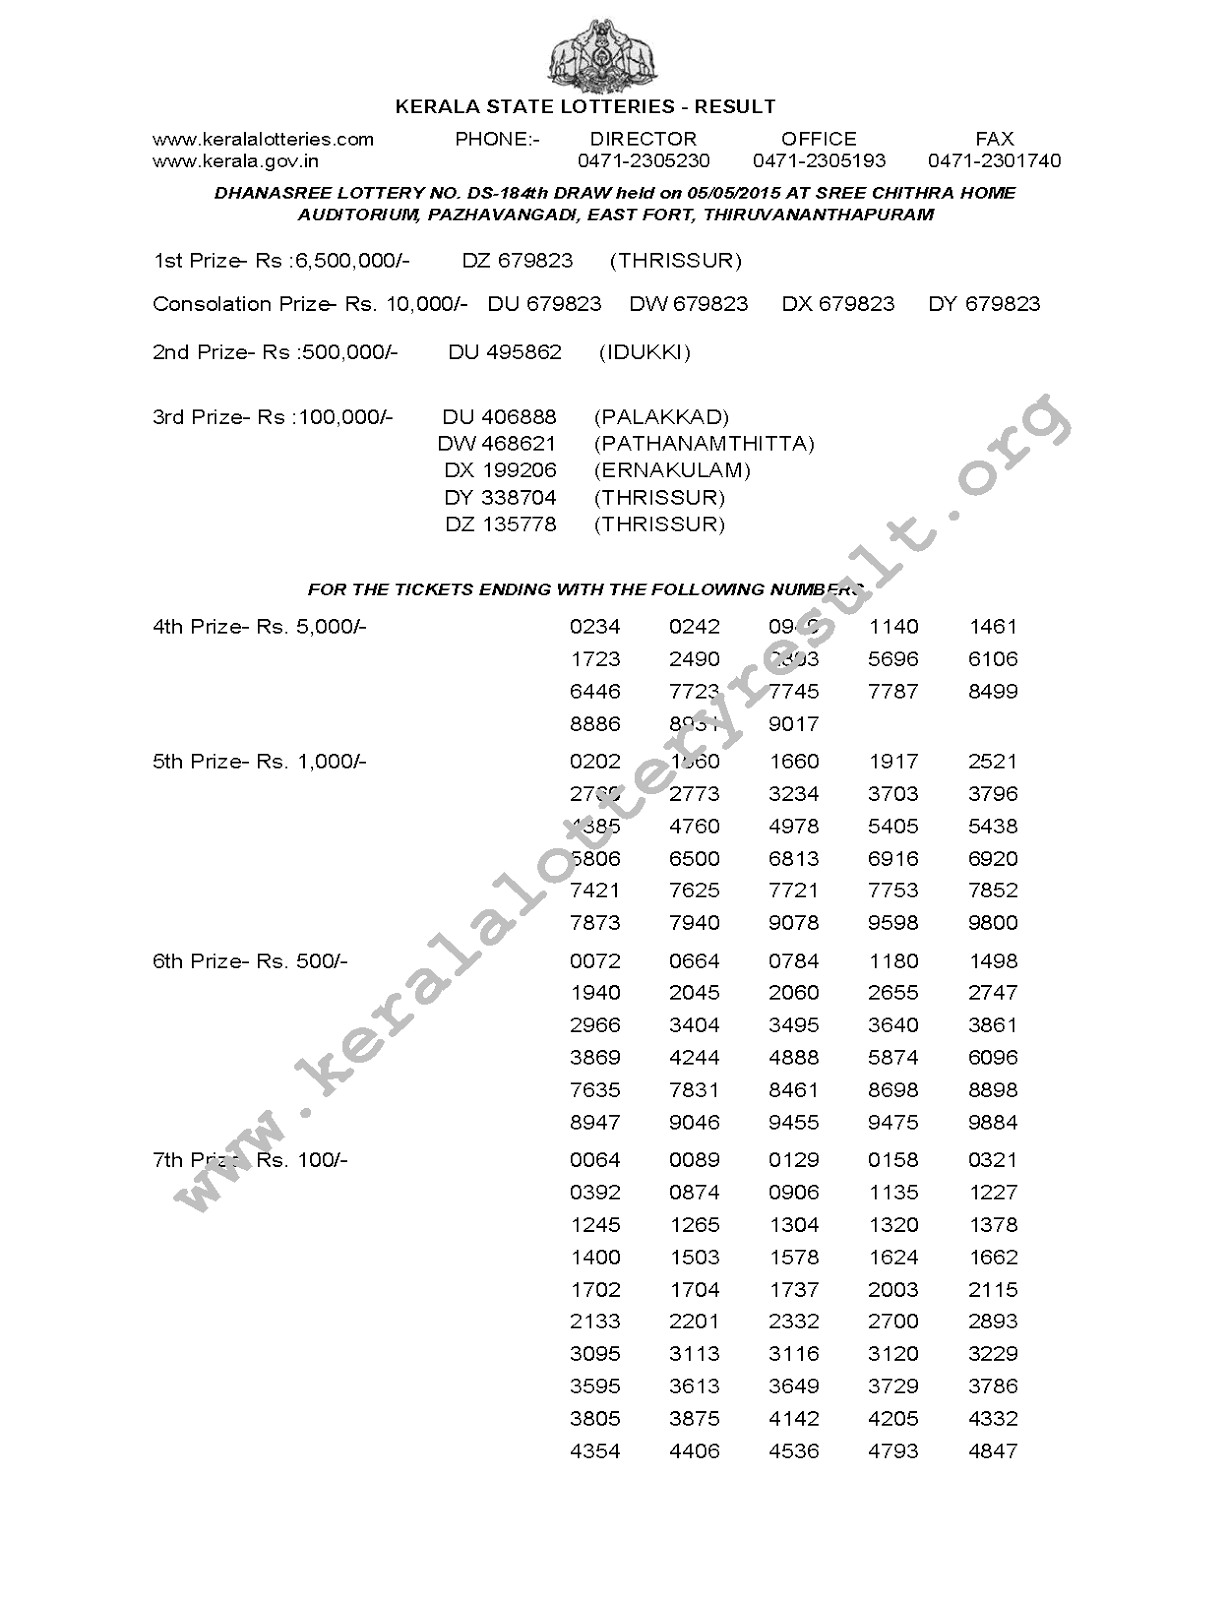 DHANASREE Lottery DS 184 Result 5-5-2015